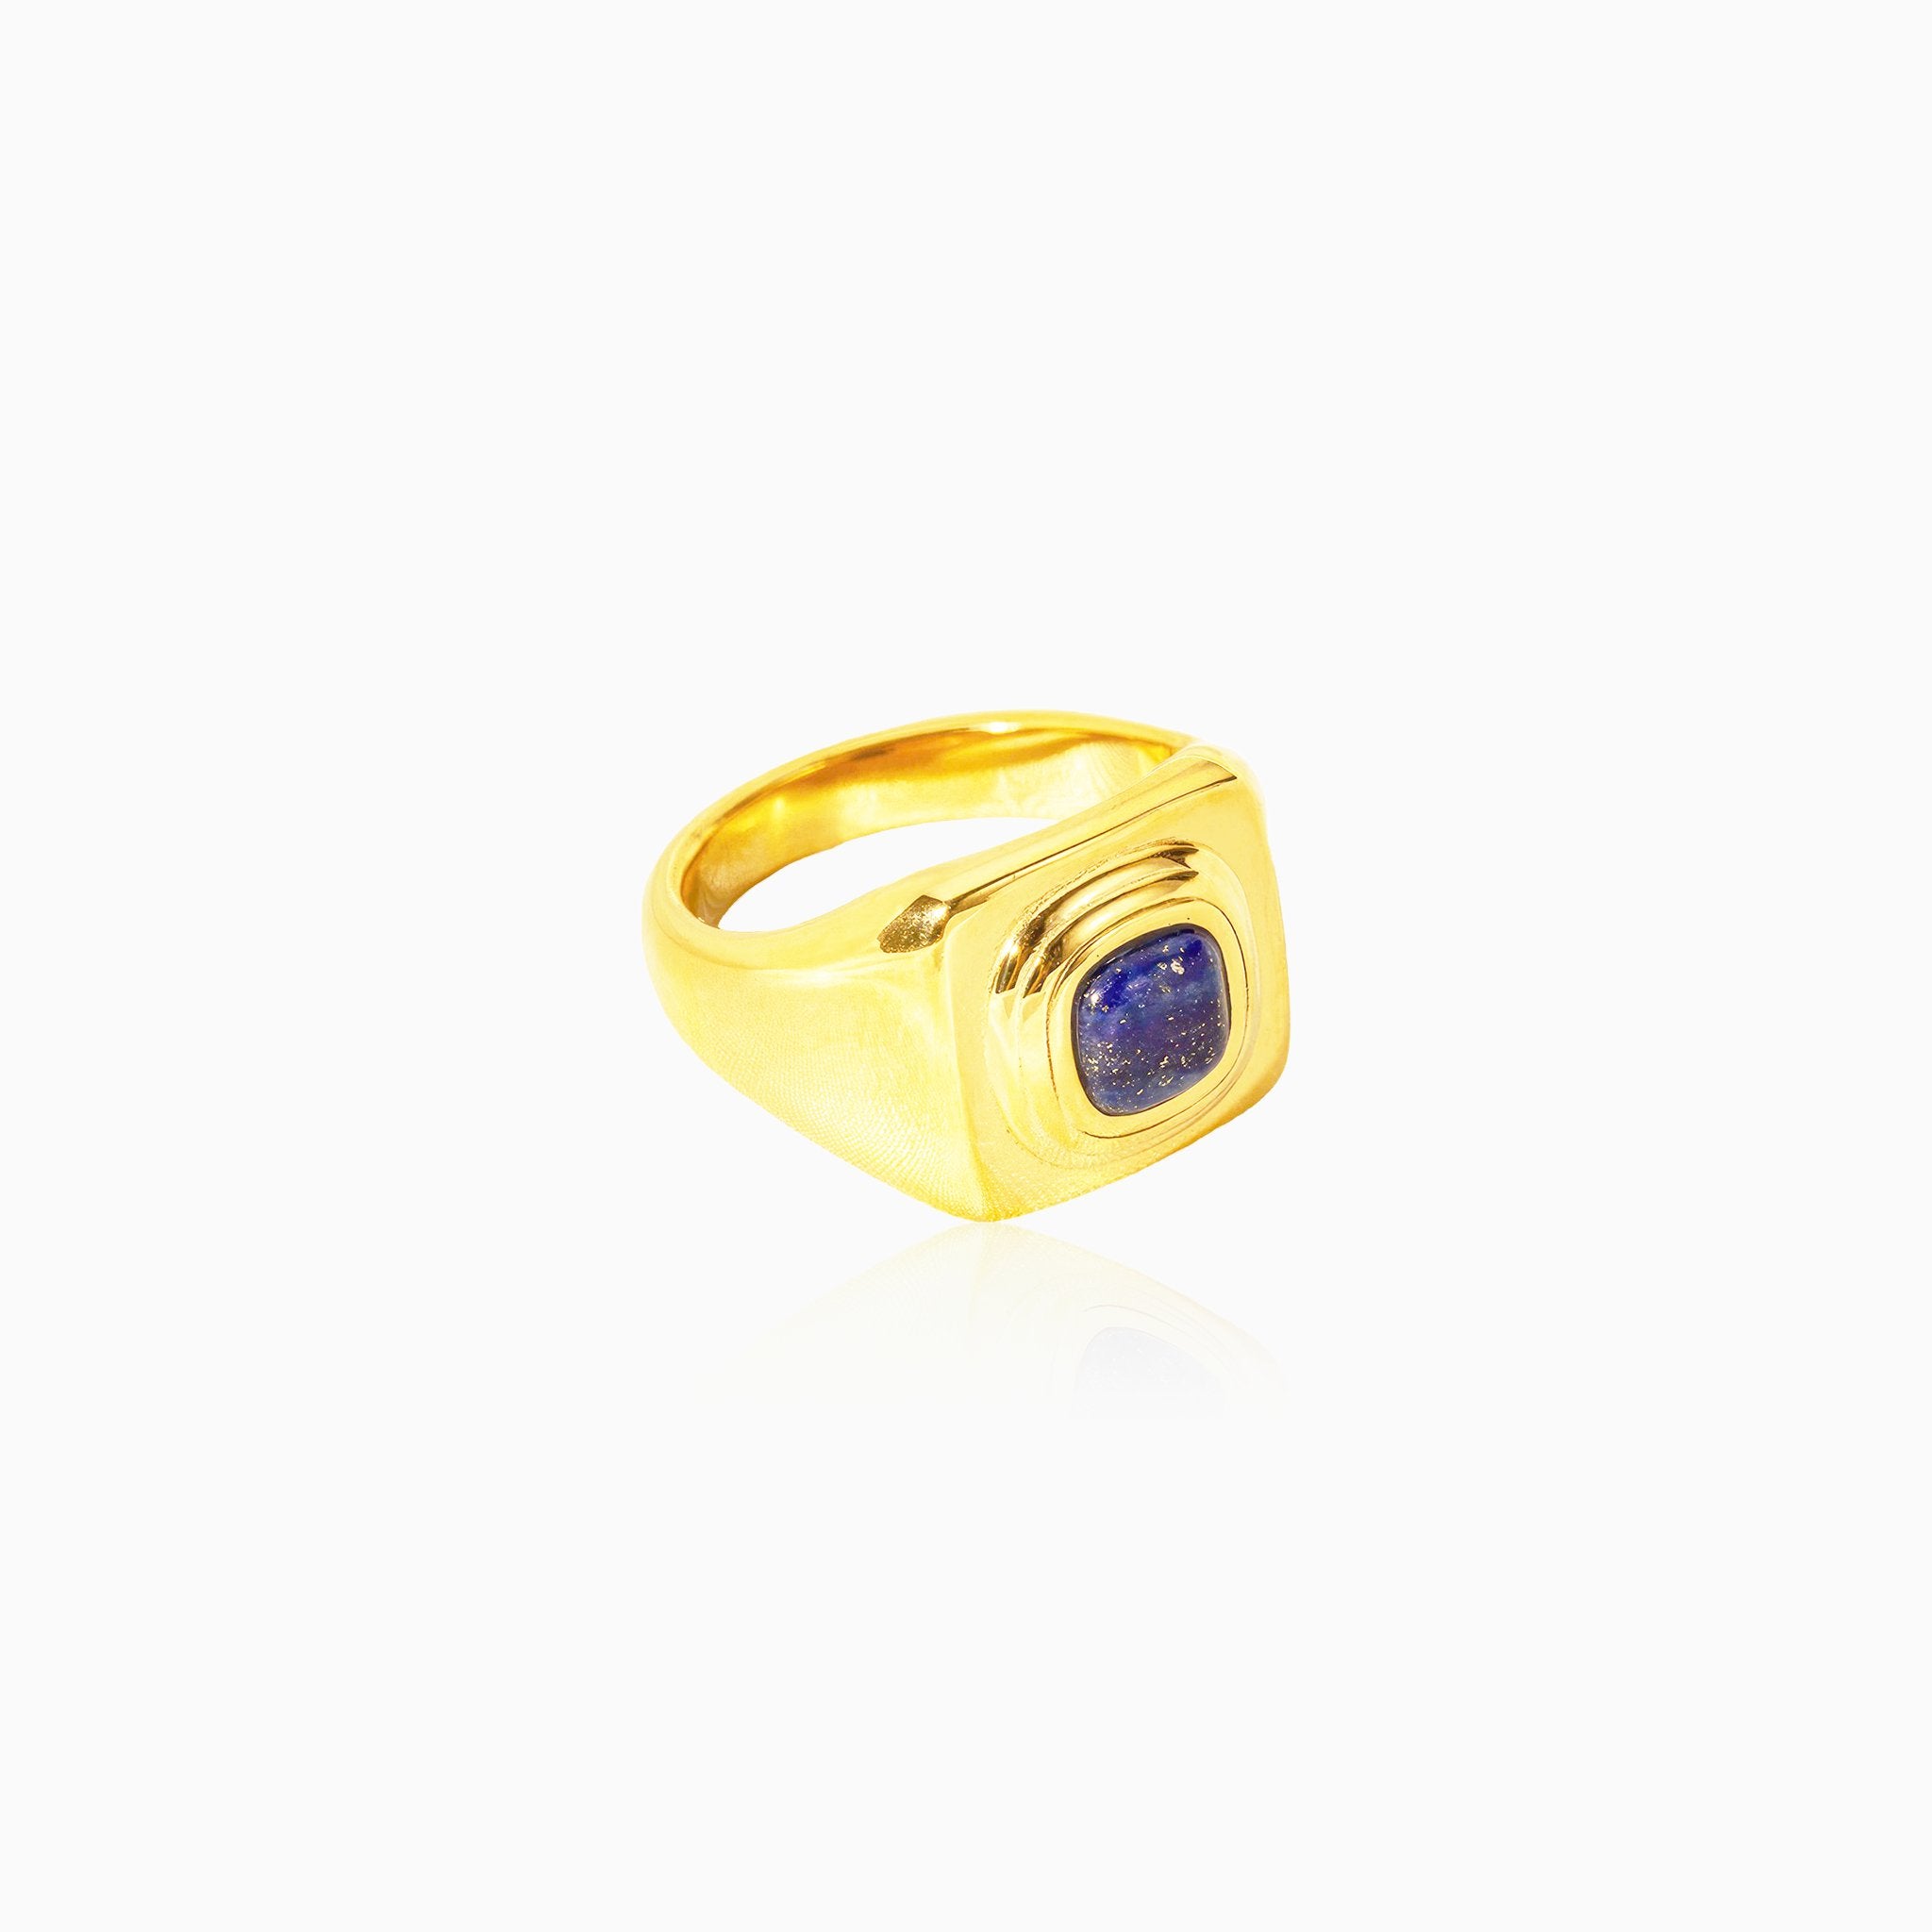 Vintage Lapis Lazuli Ring - Nobbier - Ring - 18K Gold And Titanium PVD Coated Jewelry